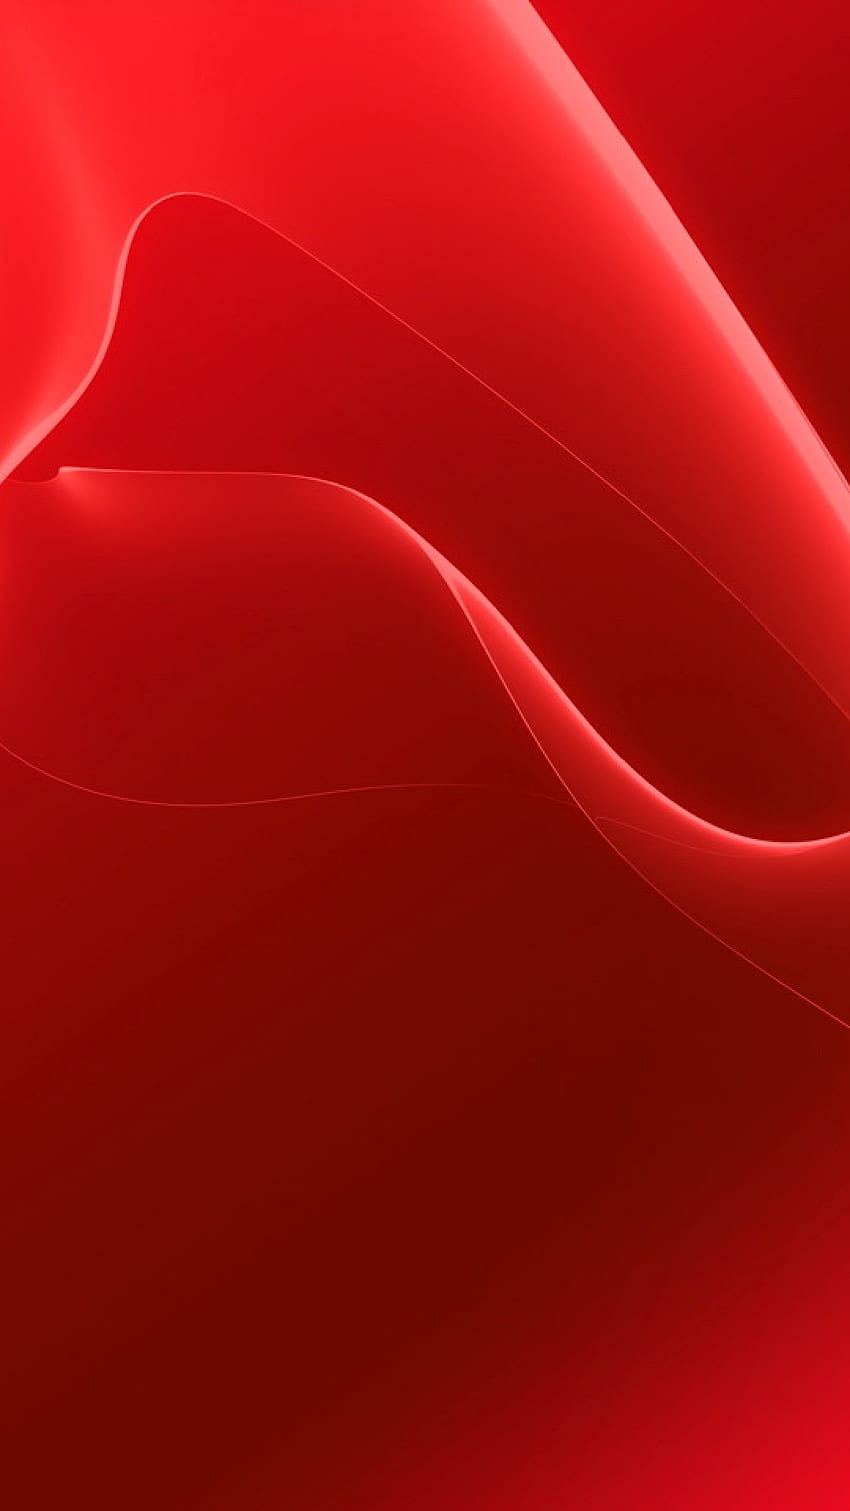 Android Best : Red Abstract Silk Android Best HD phone wallpaper